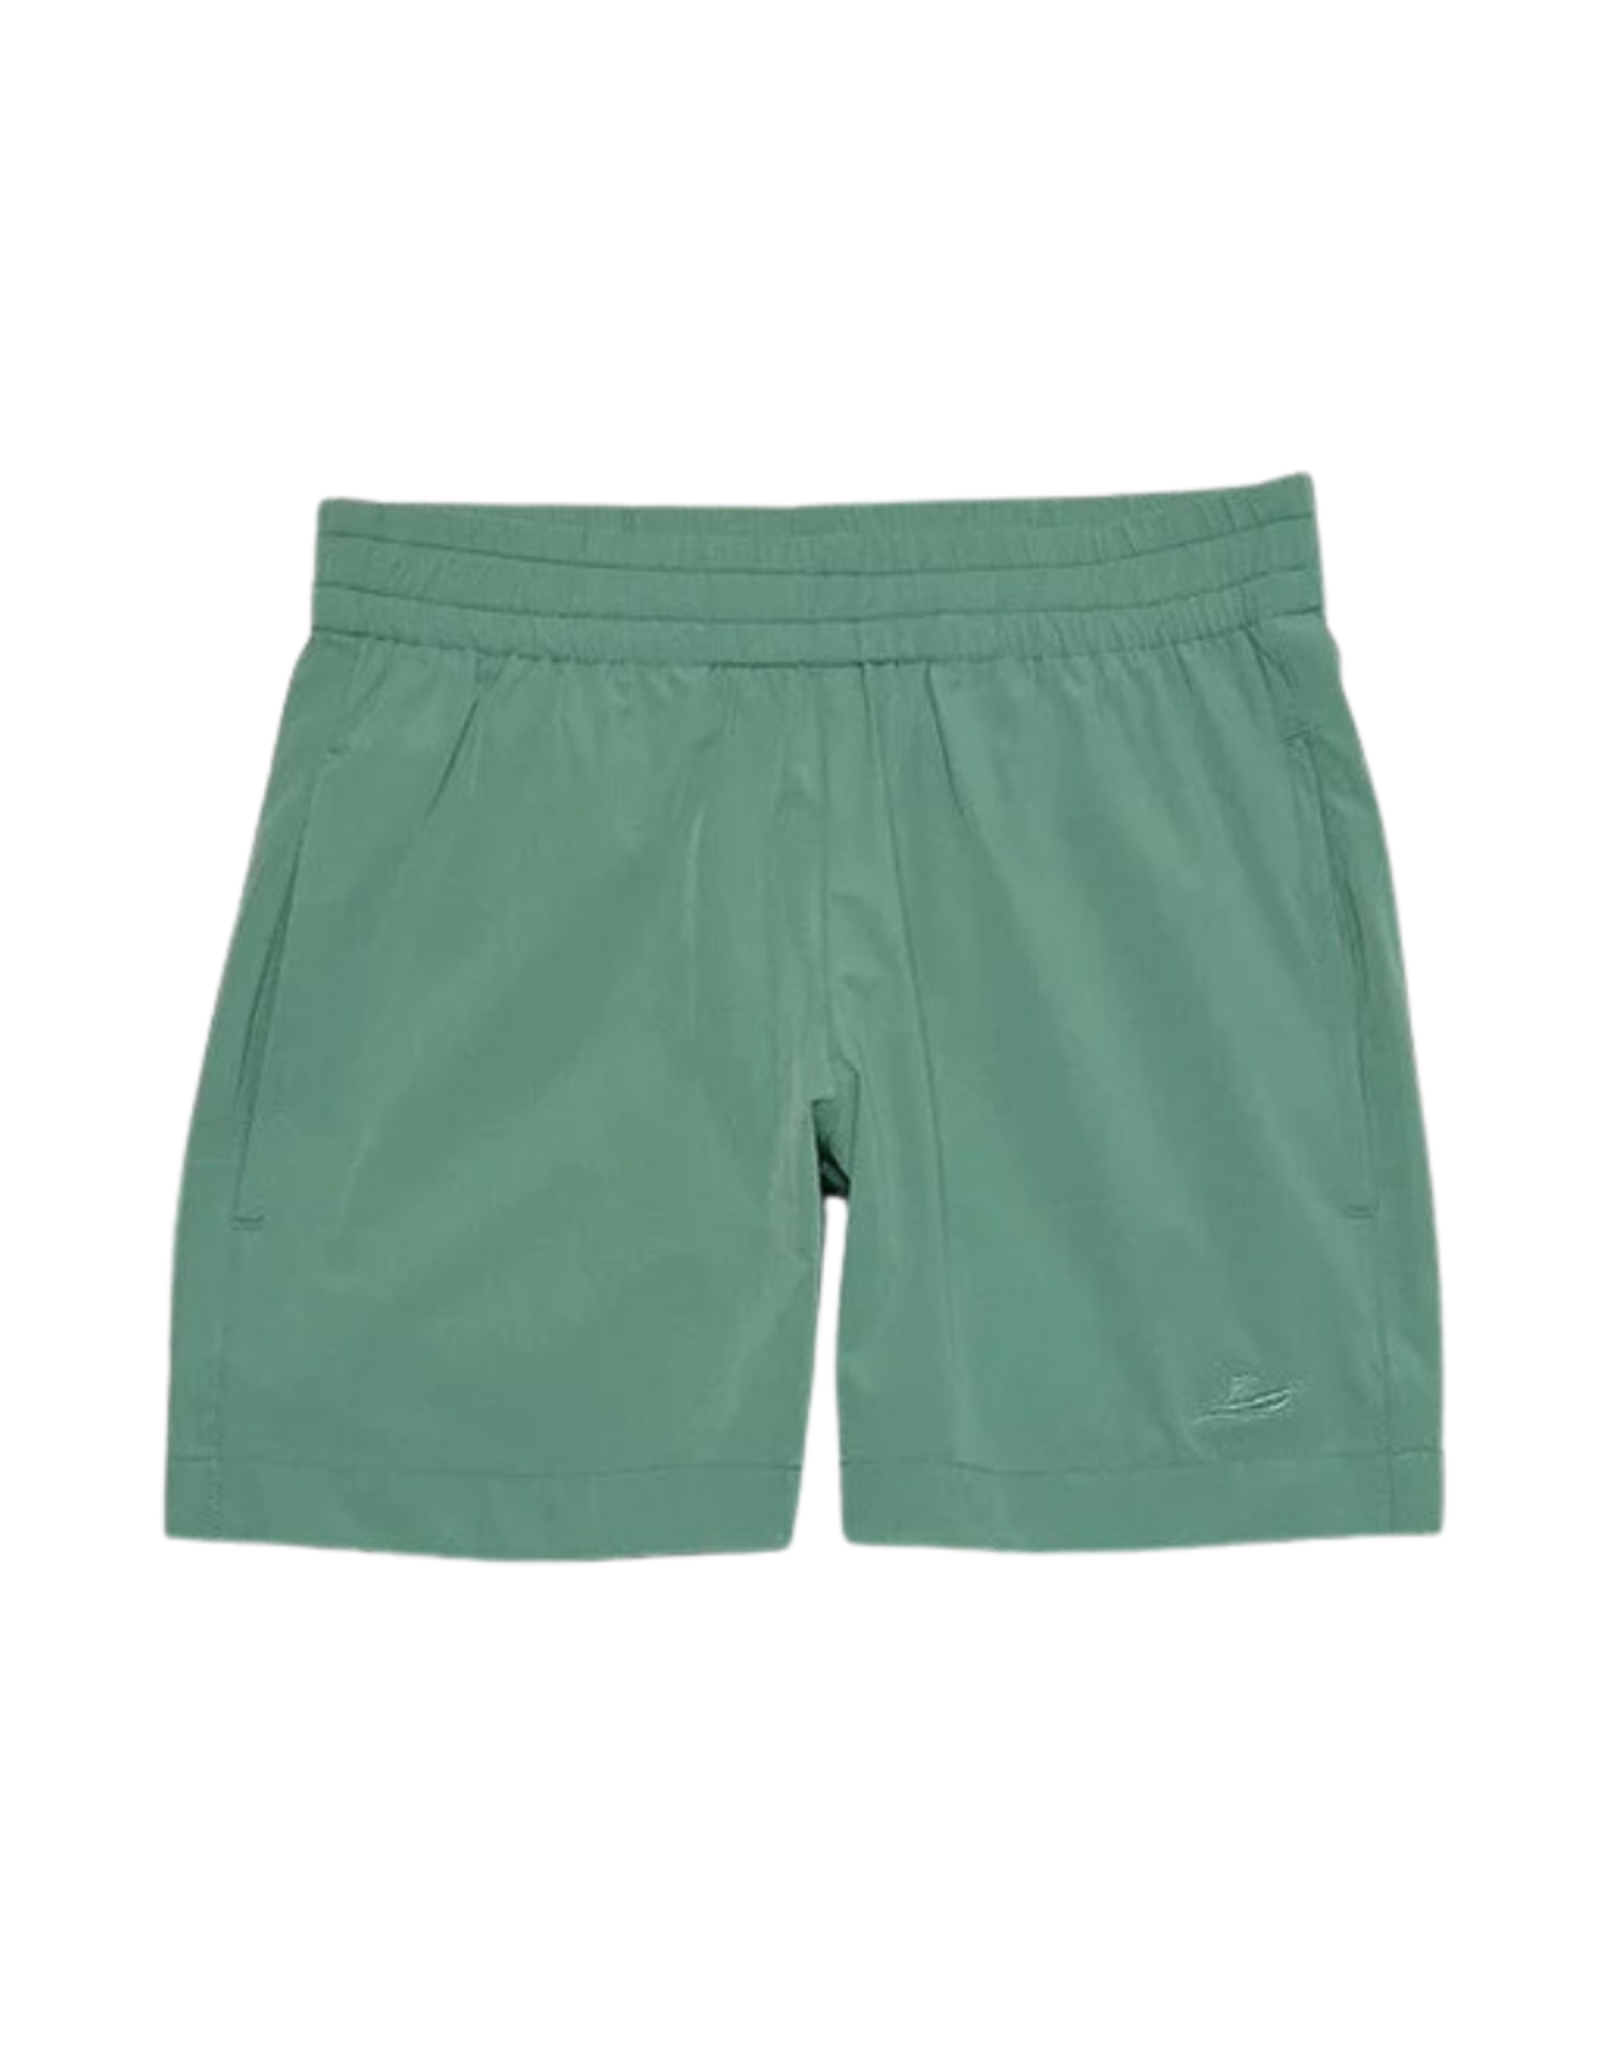 SouthBound Performance Play Shorts, Green